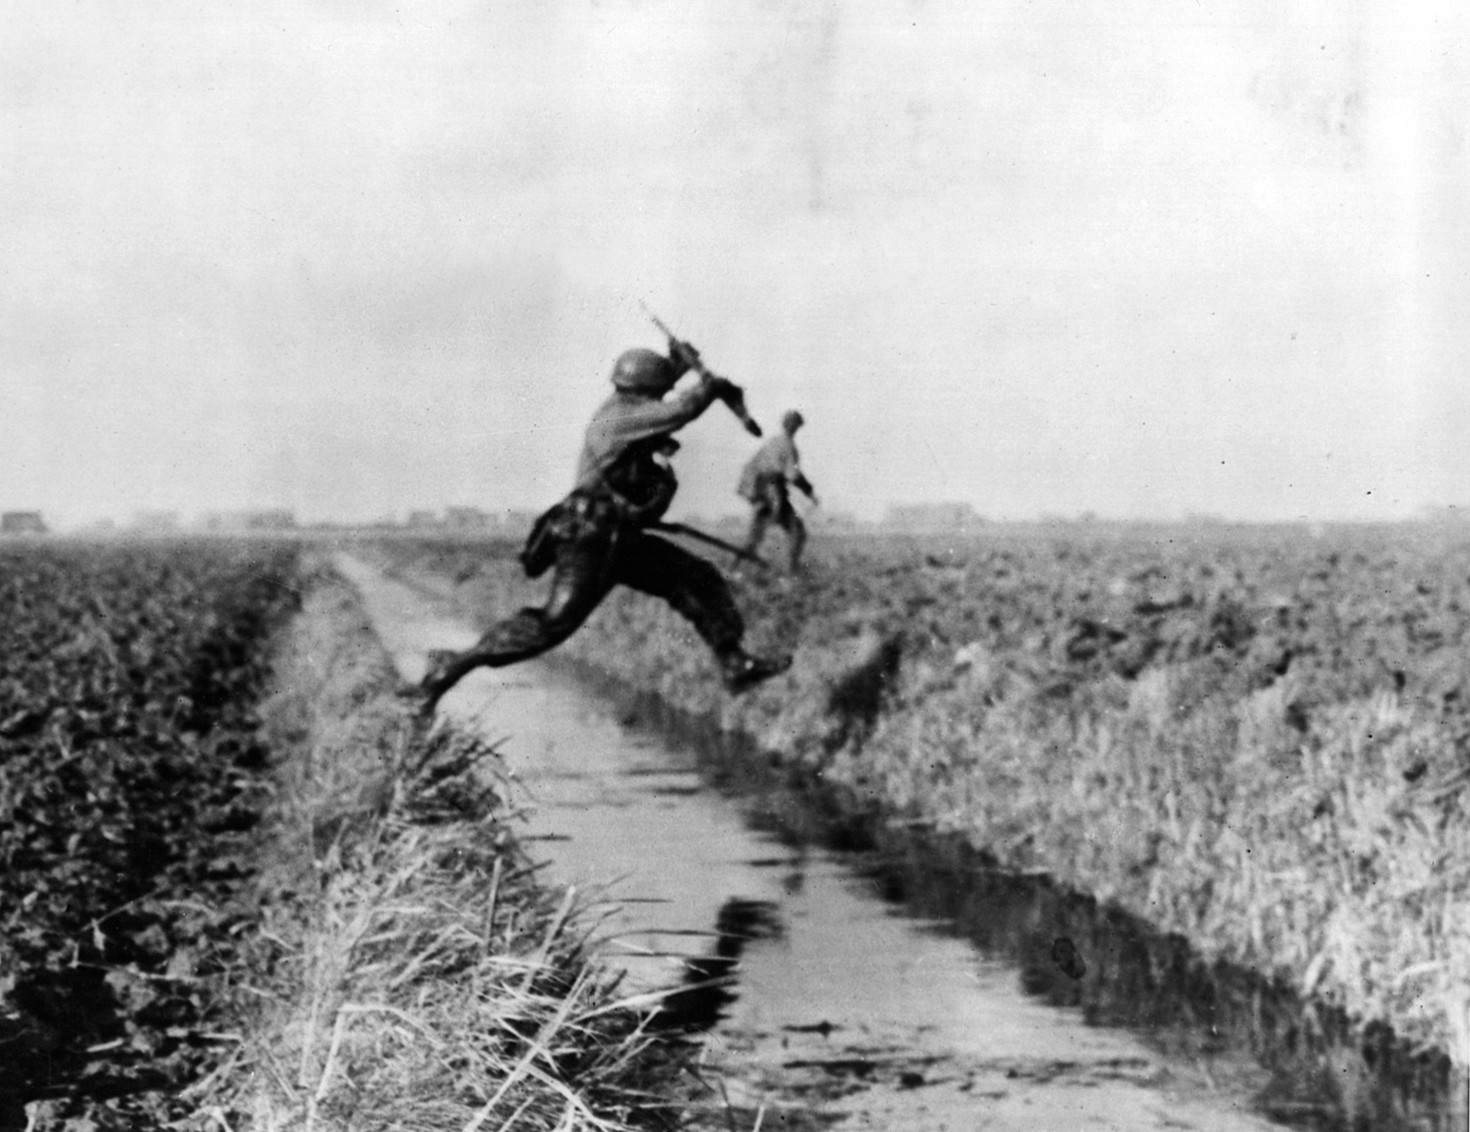 Rapidly moving across the low-lying Dutch countryside, an American soldier leaps over a drainage ditch. After the initial phase of Operation Market Garden, the fighting in Holland became more protracted.